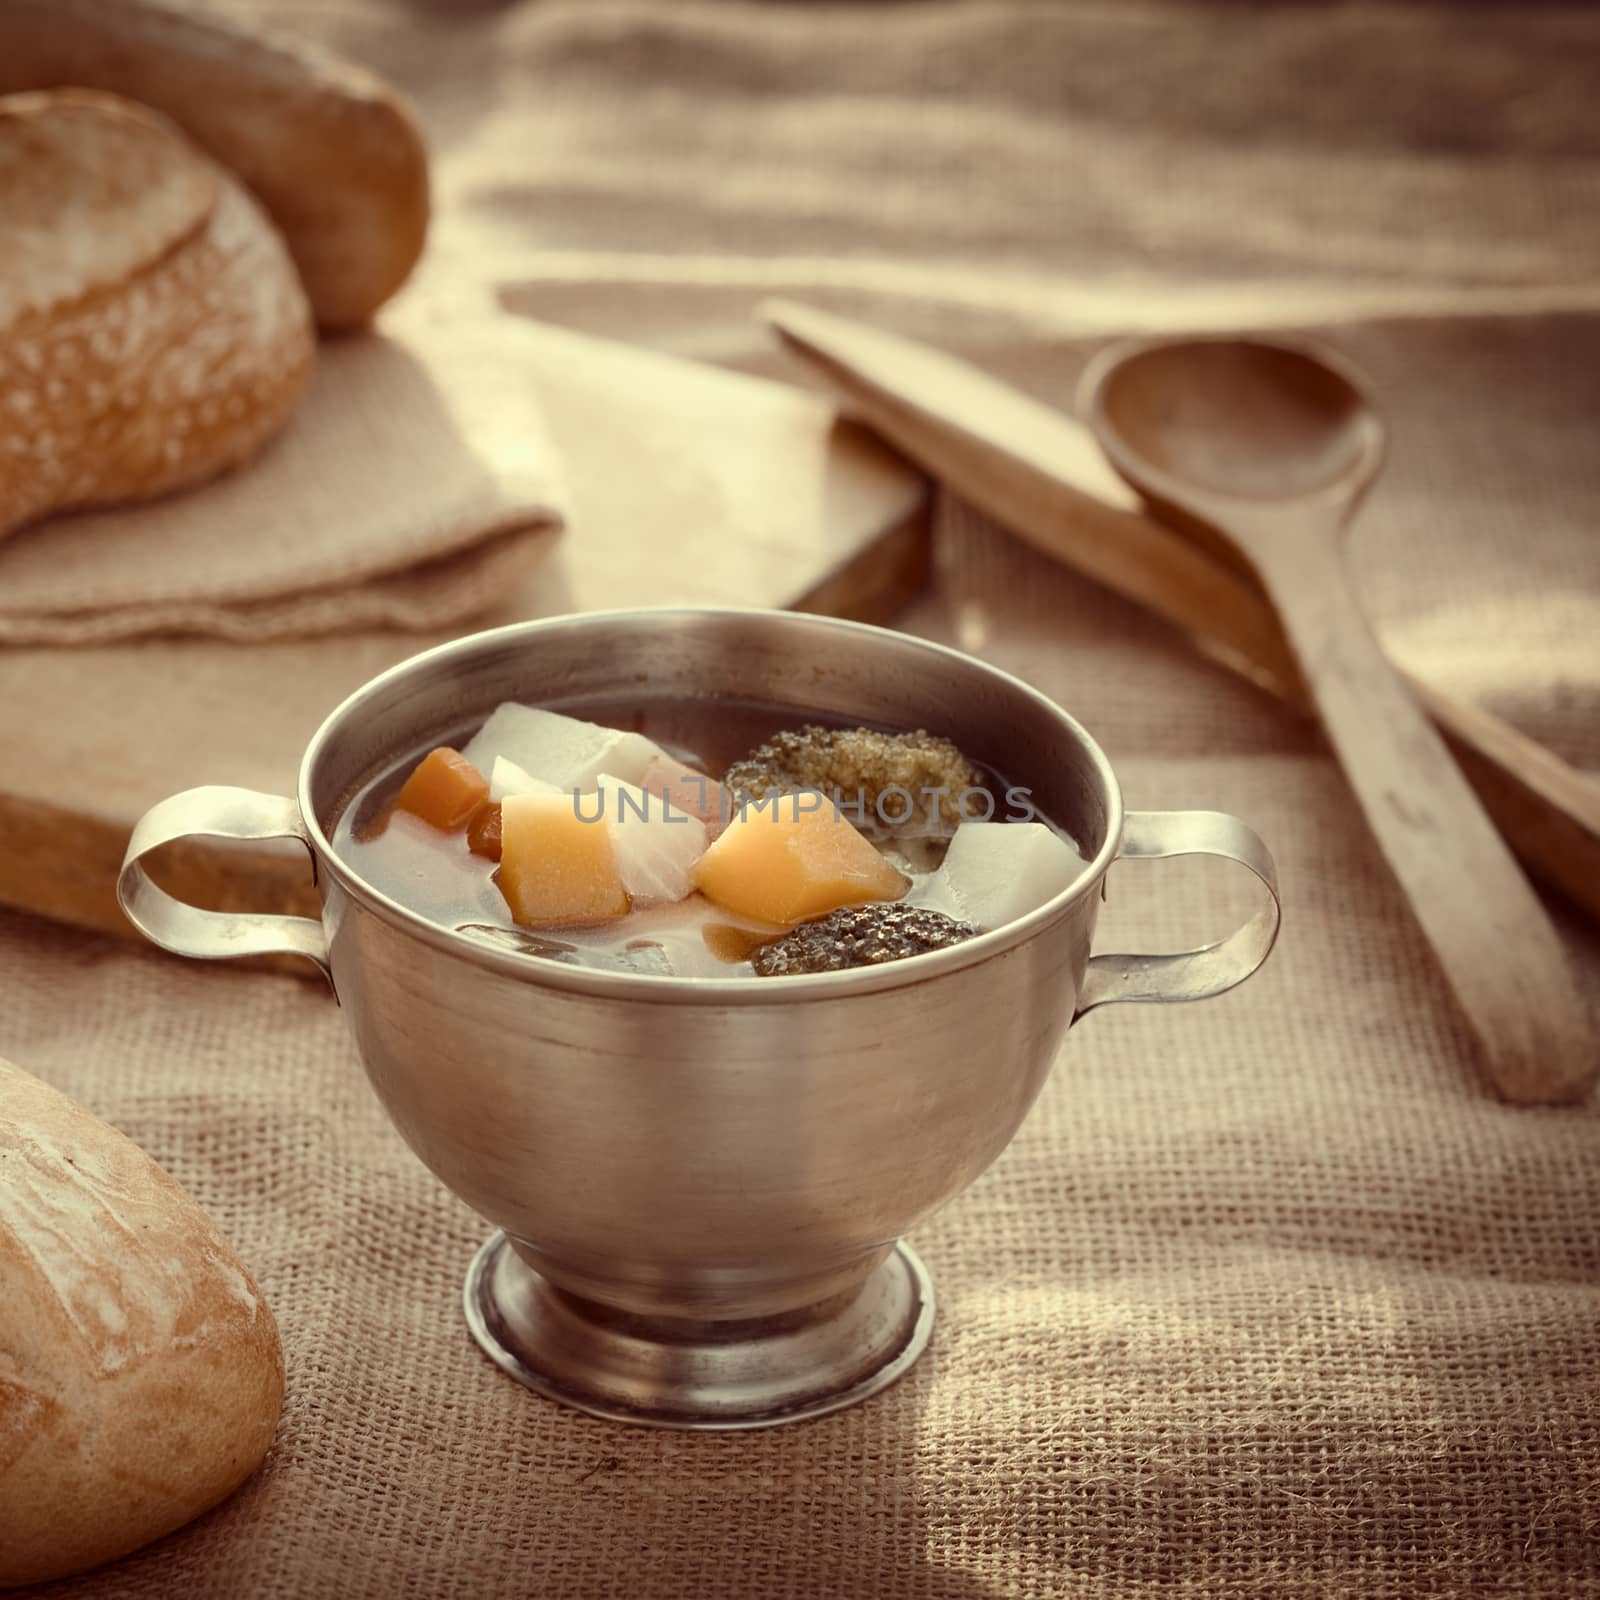 Fresh vegetarian soup made of broccoli, squash, onion, carrot, potato and tomato served in a metal cup on jute cloth and accompanied by ciabatta buns, low contrast image (Selective Focus, Focus on the middle of the soup)